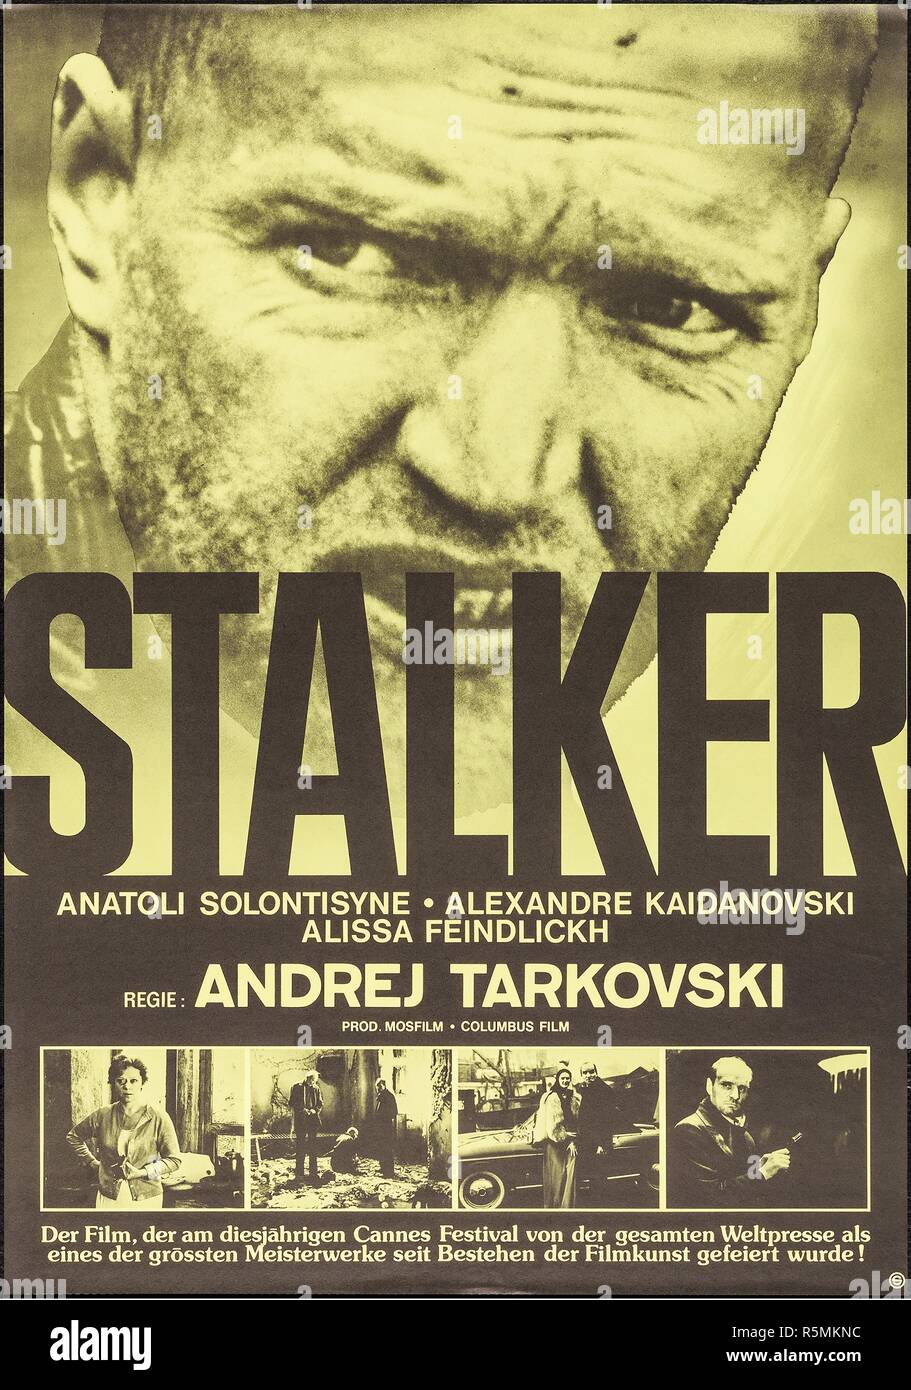 Movie poster Stalker by Andrei Tarkovsky. Museum: PRIVATE COLLECTION. Author: ANONYMOUS. Stock Photo